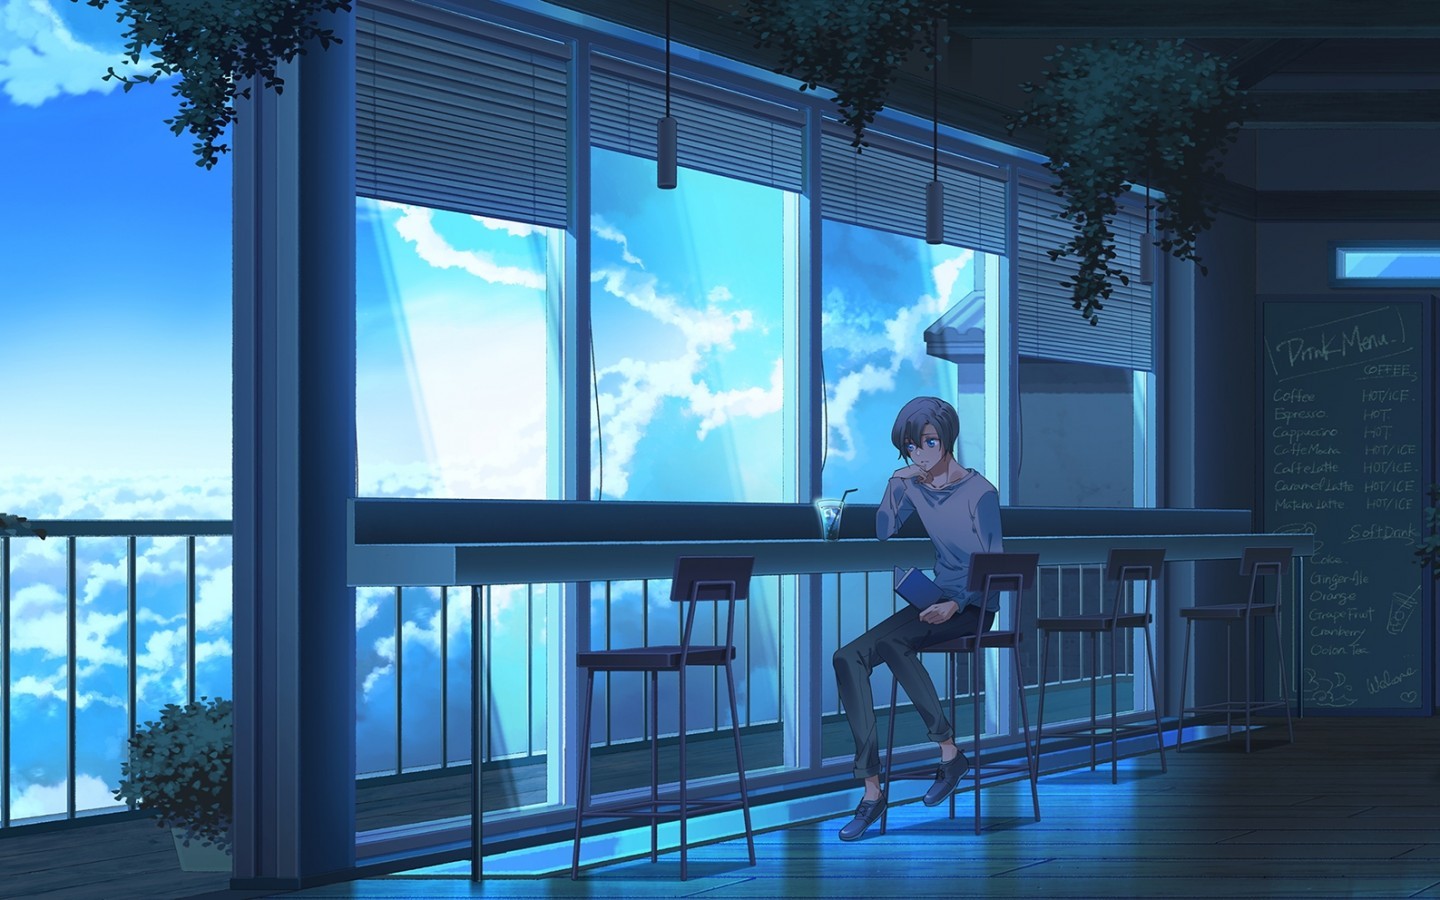 Anime Boy Sitting Alone Wallpapers